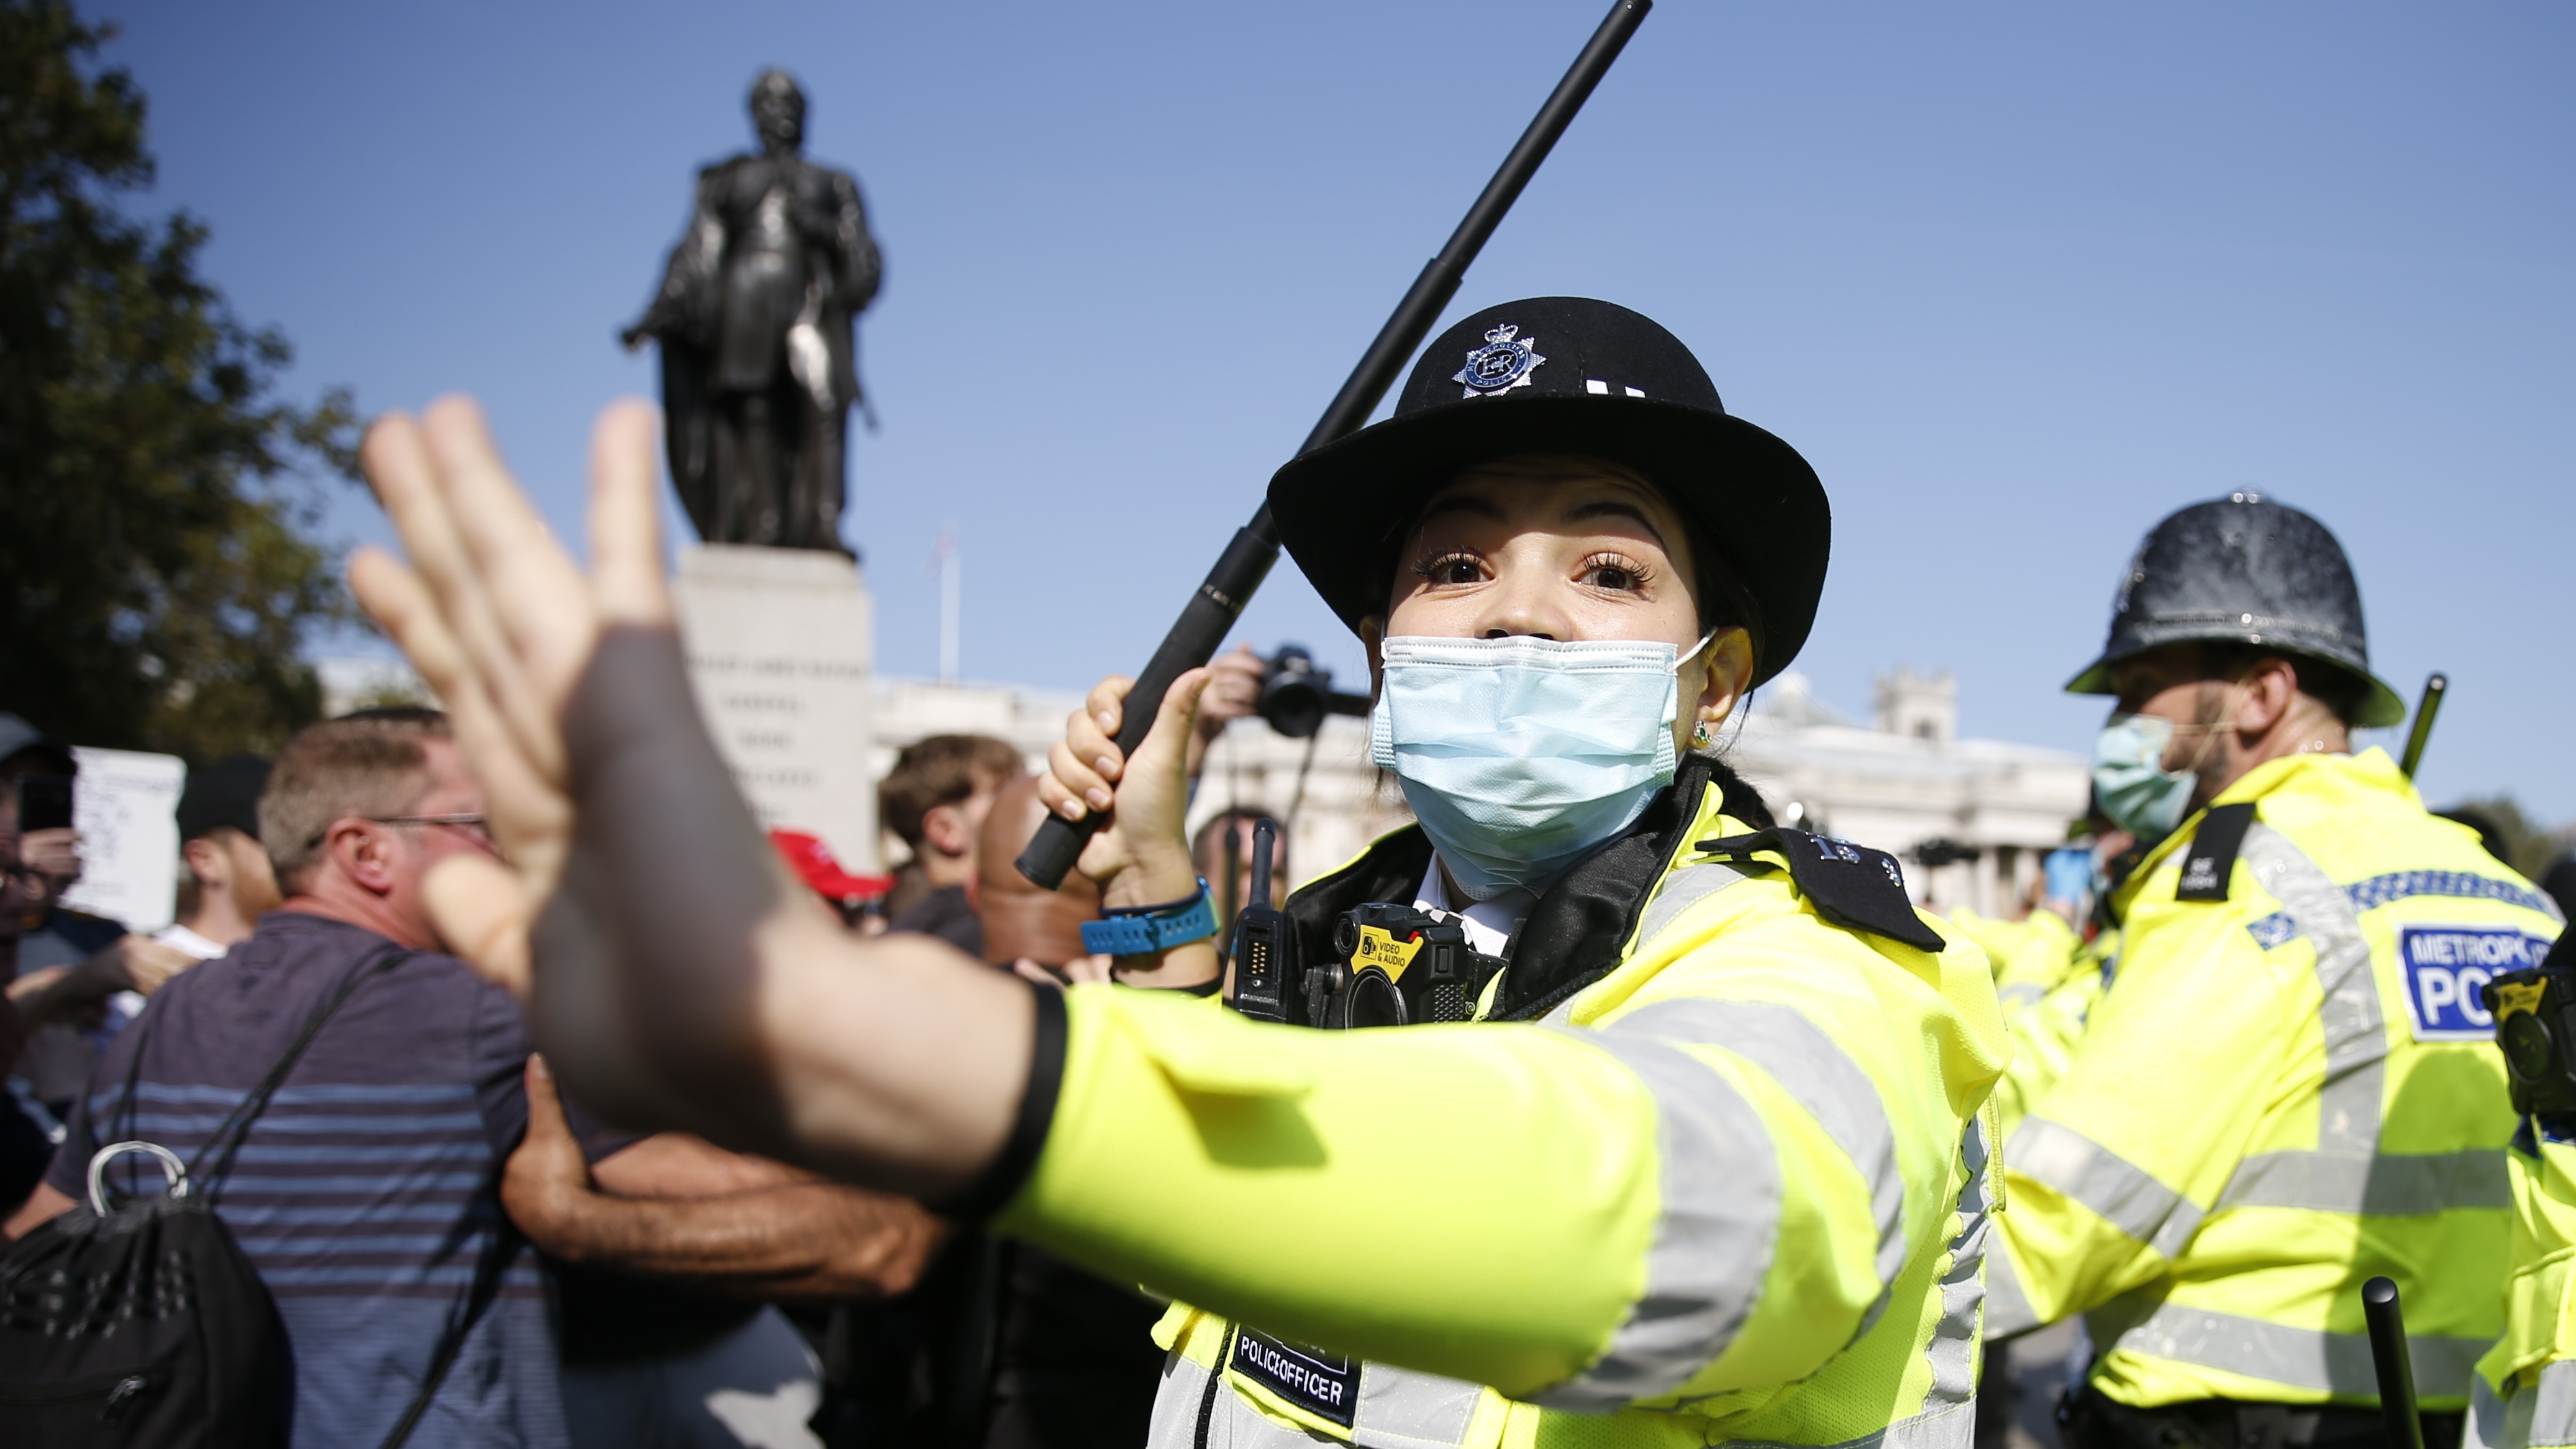 A police officer during an anti-vaccination protest in Trafalgar Square, London